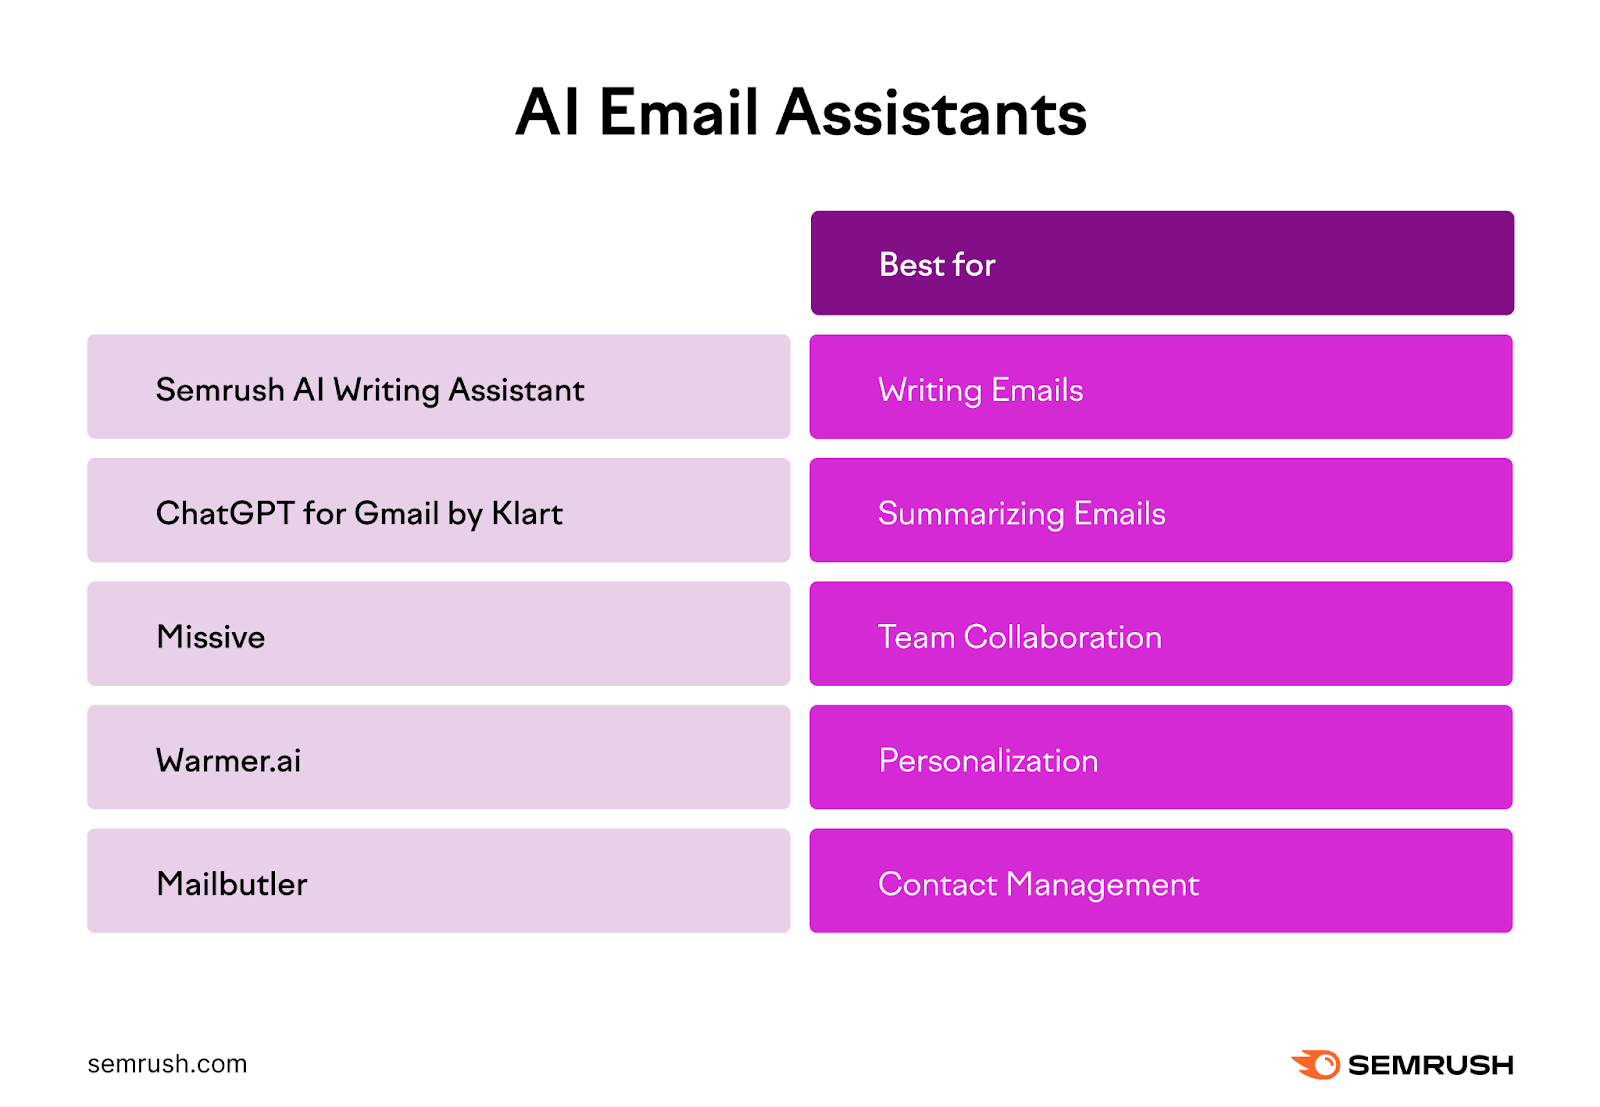 A list of AI email assistants